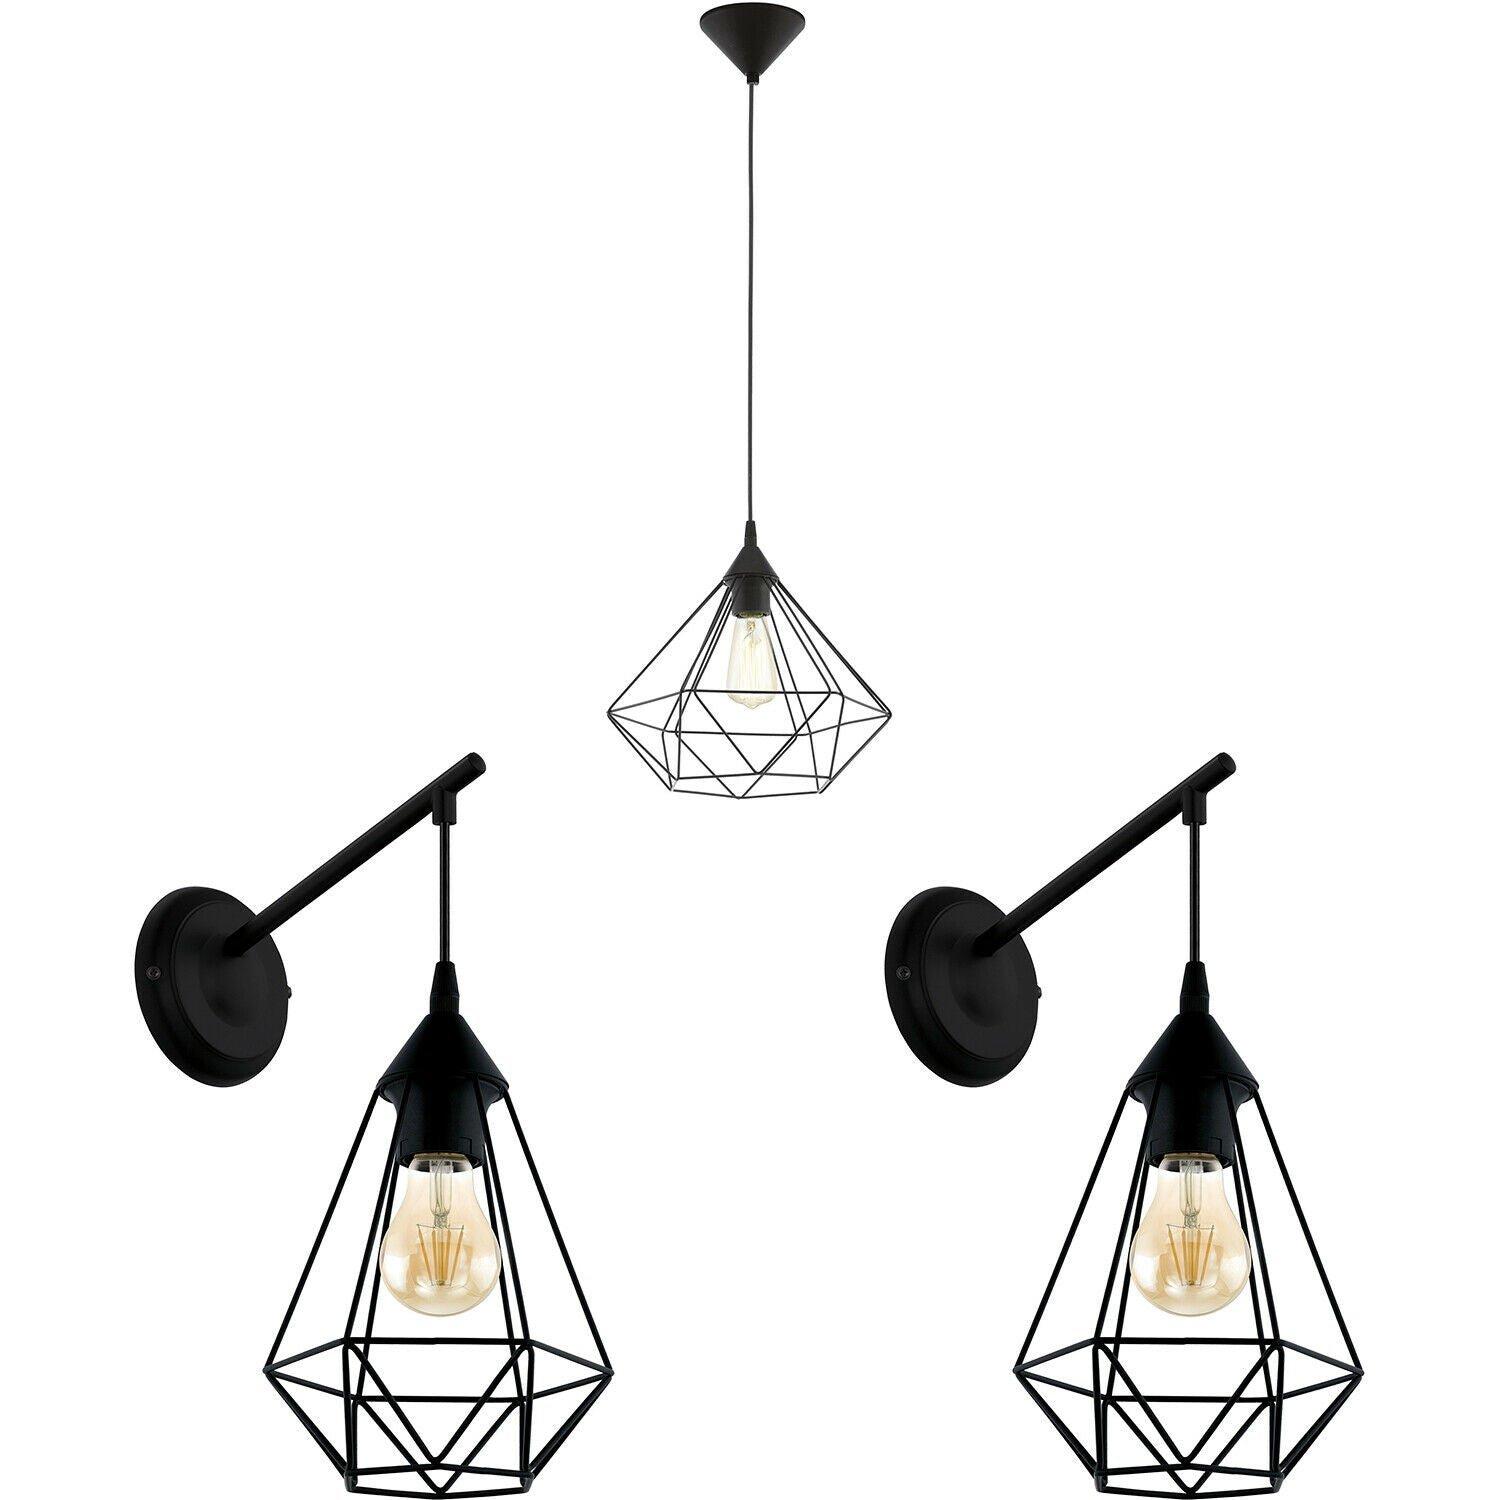 Ceiling Pendant Light & 2x Matching Wall Lights Black Geometric Cage Wire Lamp